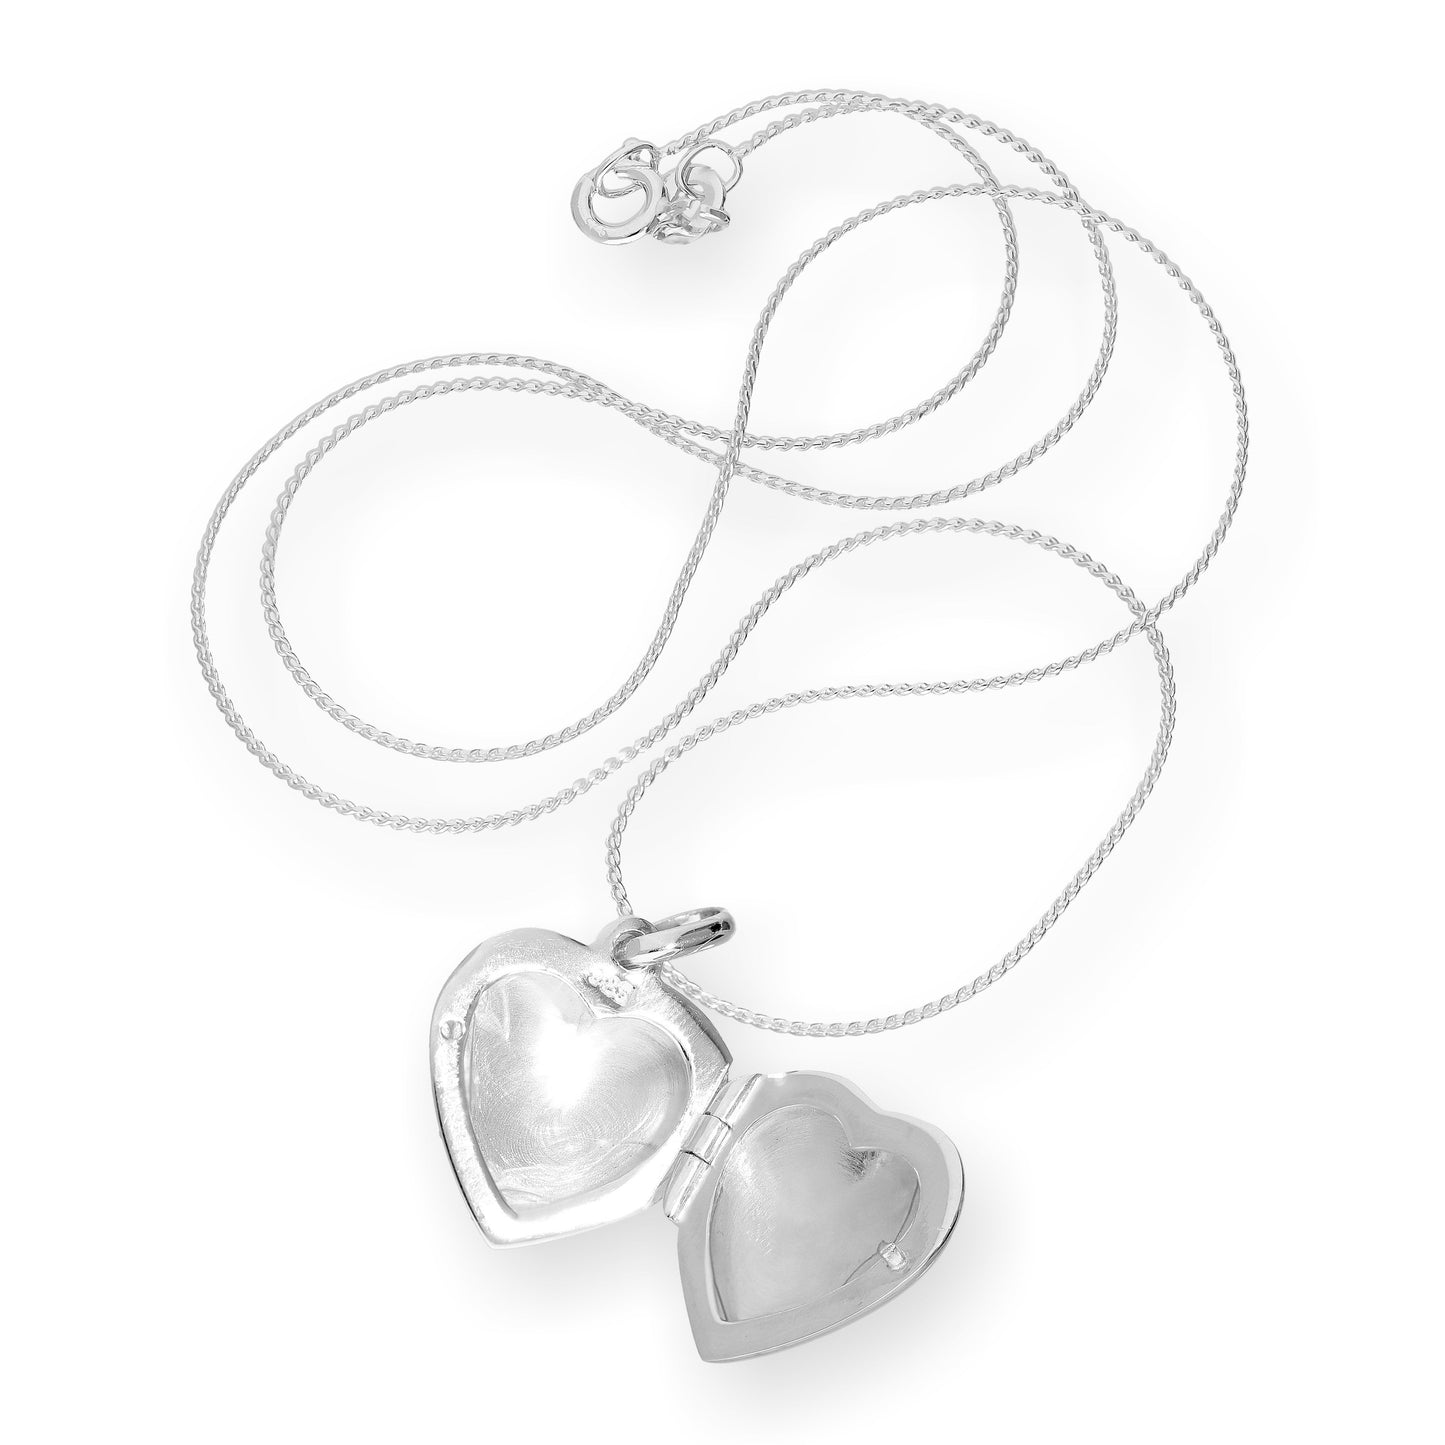 Sterling Silver Puffed Heart Engraved Locket on Chain 16 - 22 Inches